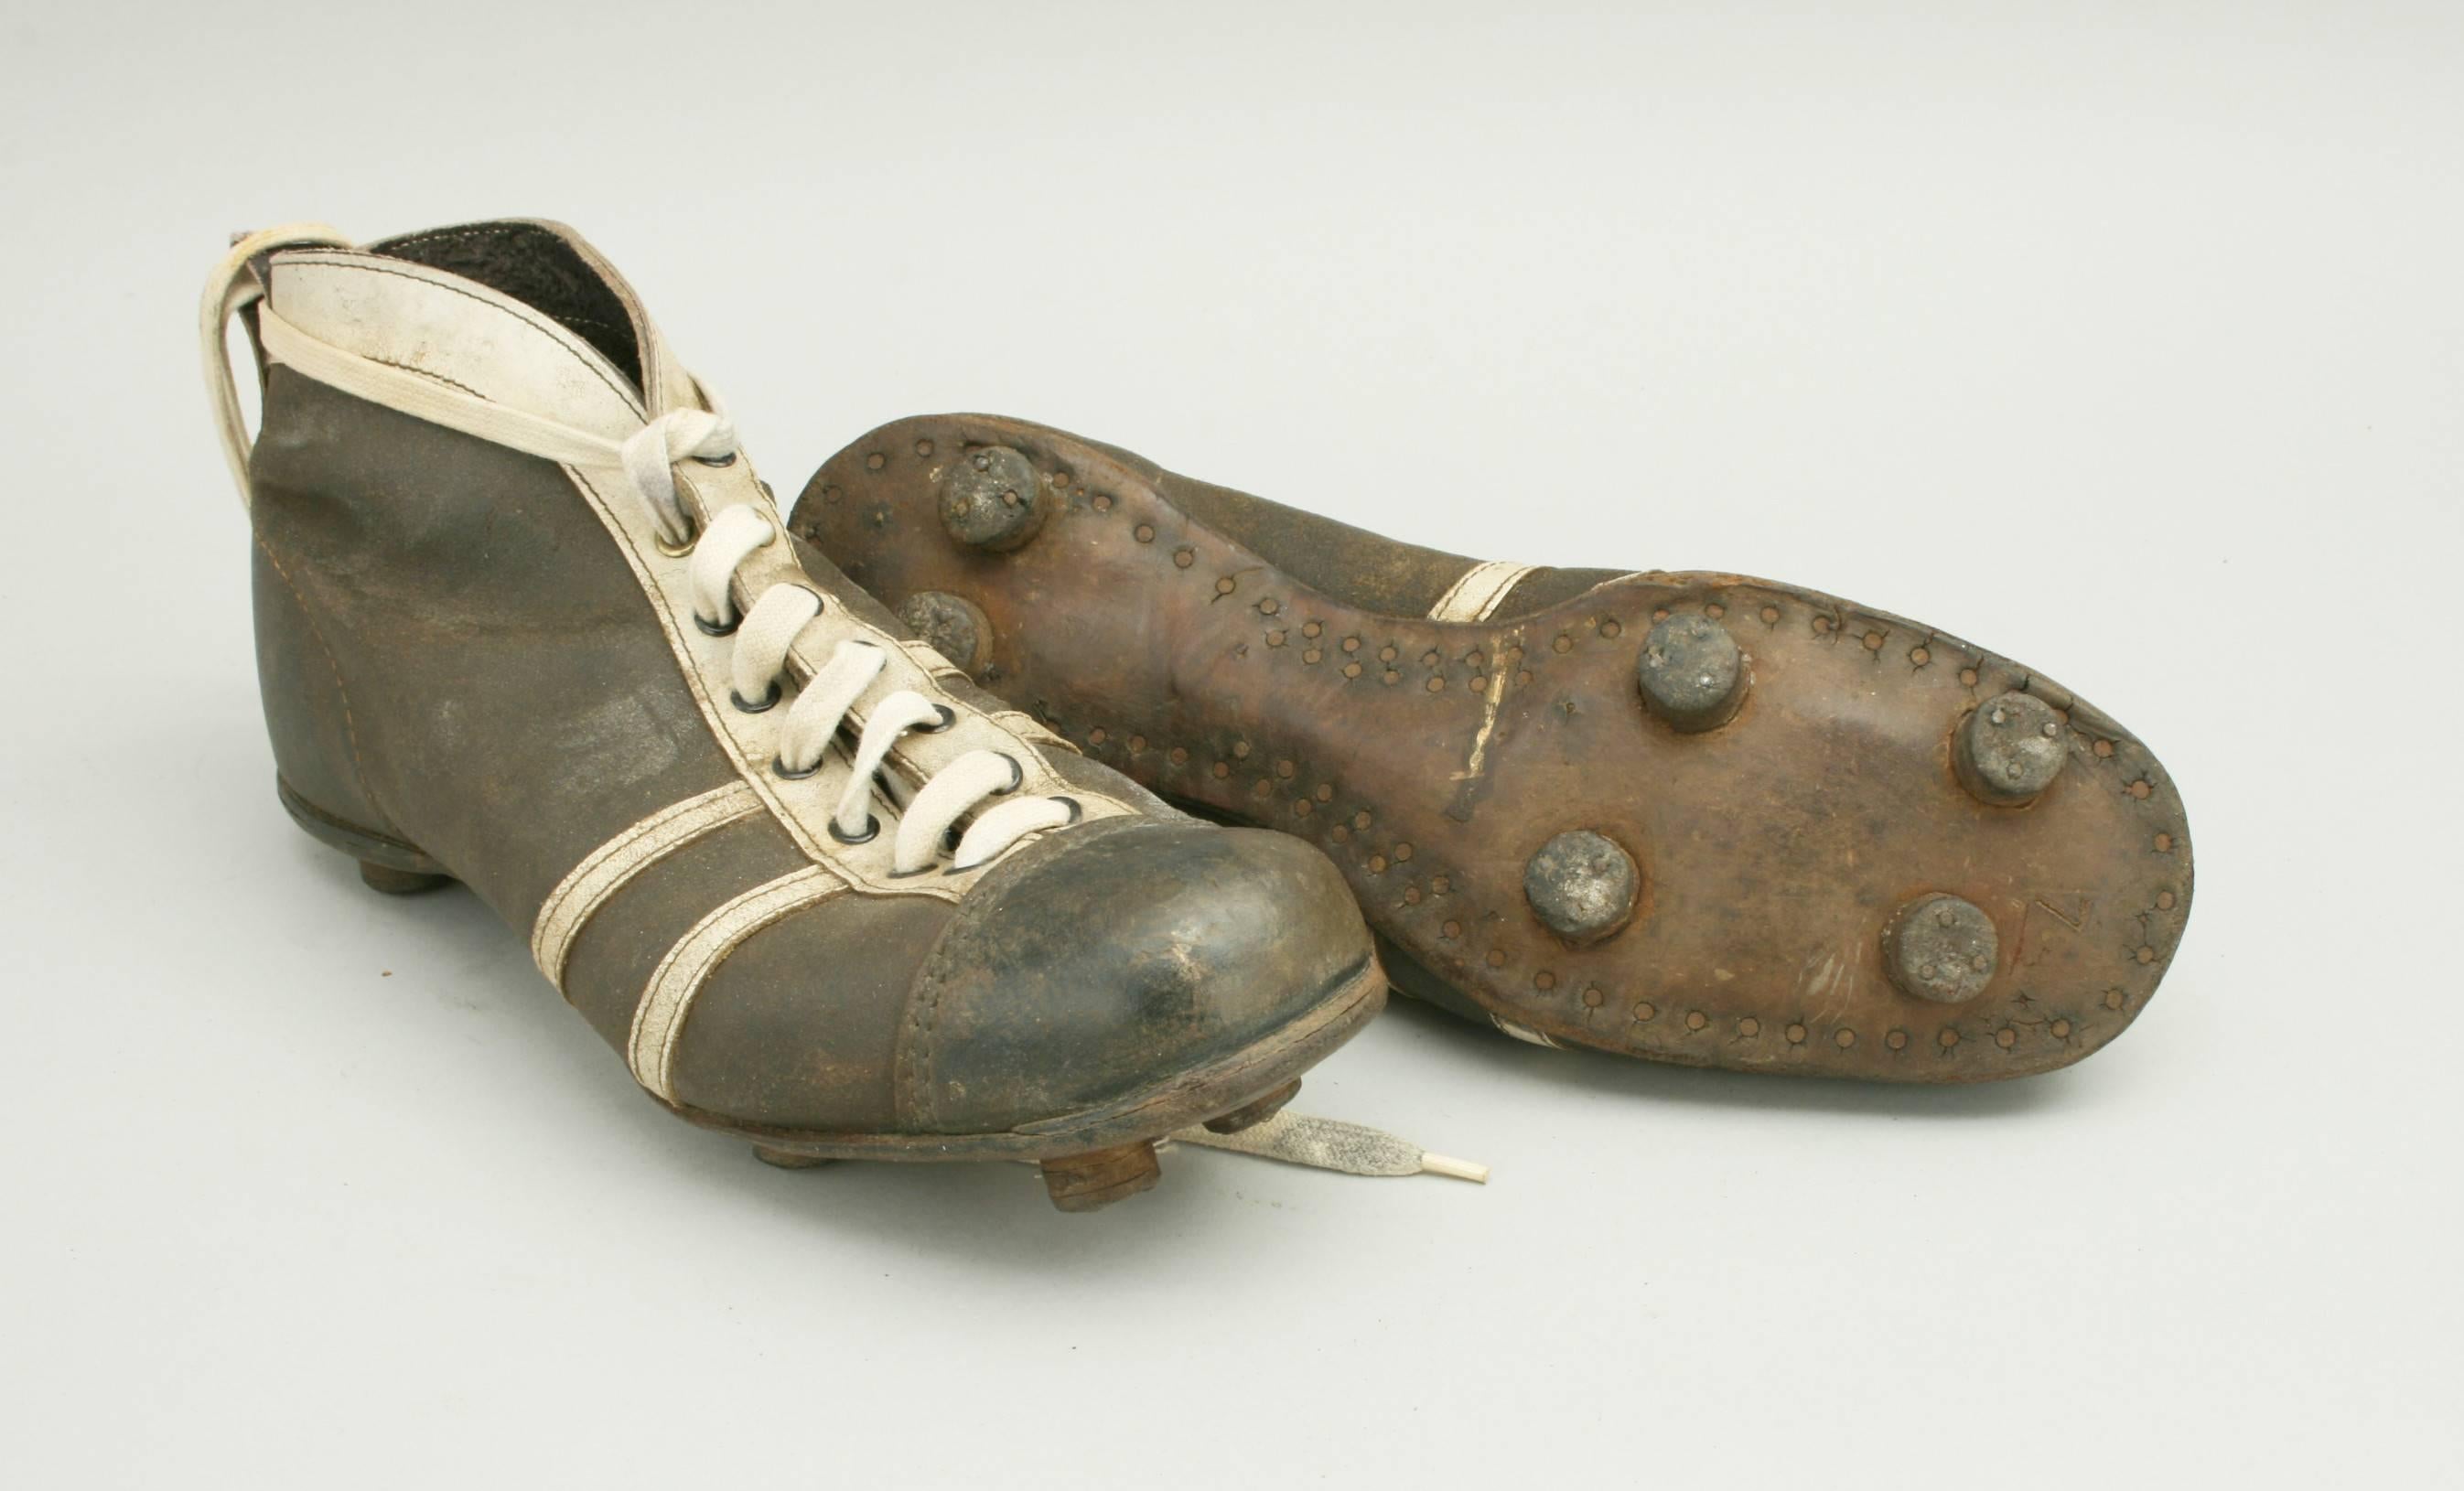 A pair of used black and white leather football boots. The toe area on the boots is made of hardened leather, as it was the normal play to toe-kick the football rather than use the instep as in today's game. The sole of the boots are fitted with 6